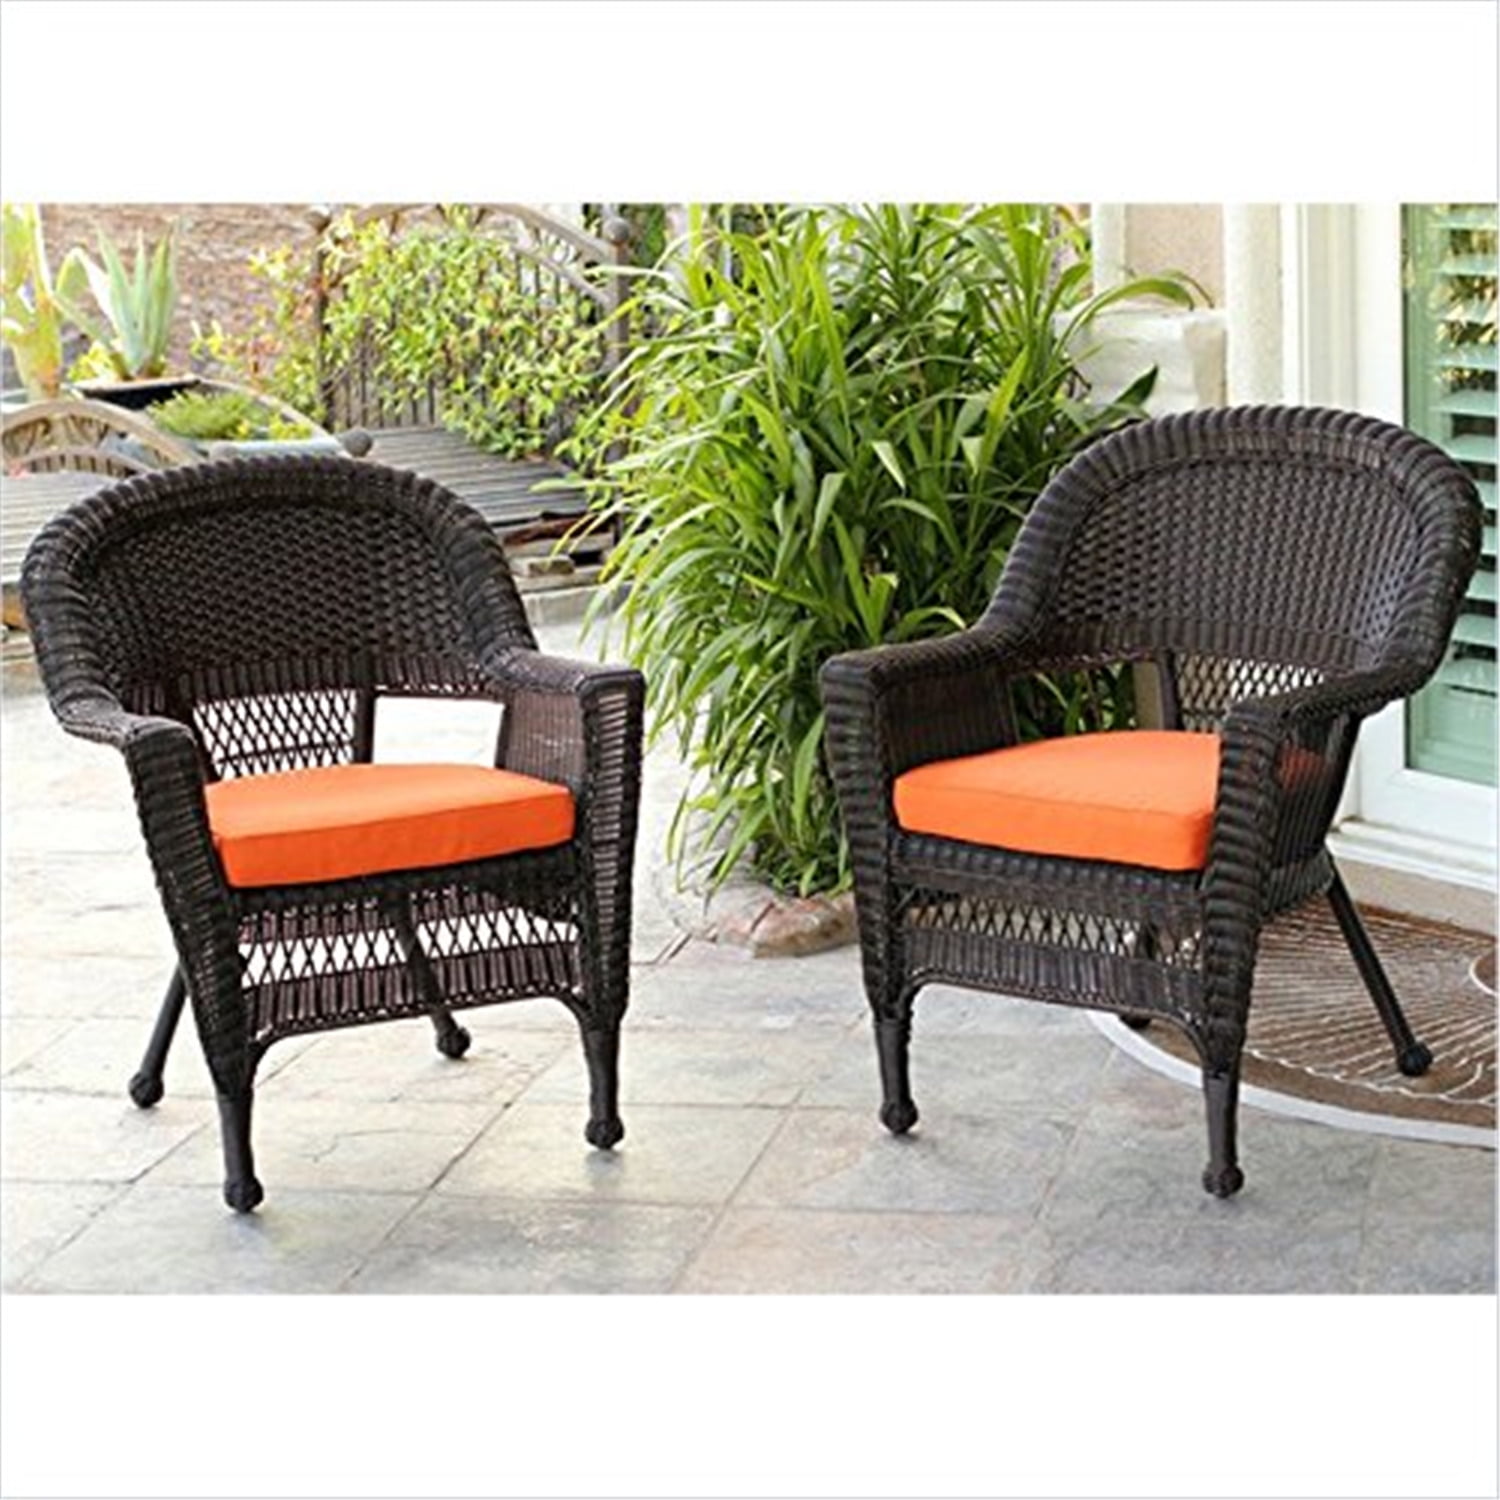 Patio Dining Chair Slipcover Set for 2 chairs Hampton Bay 